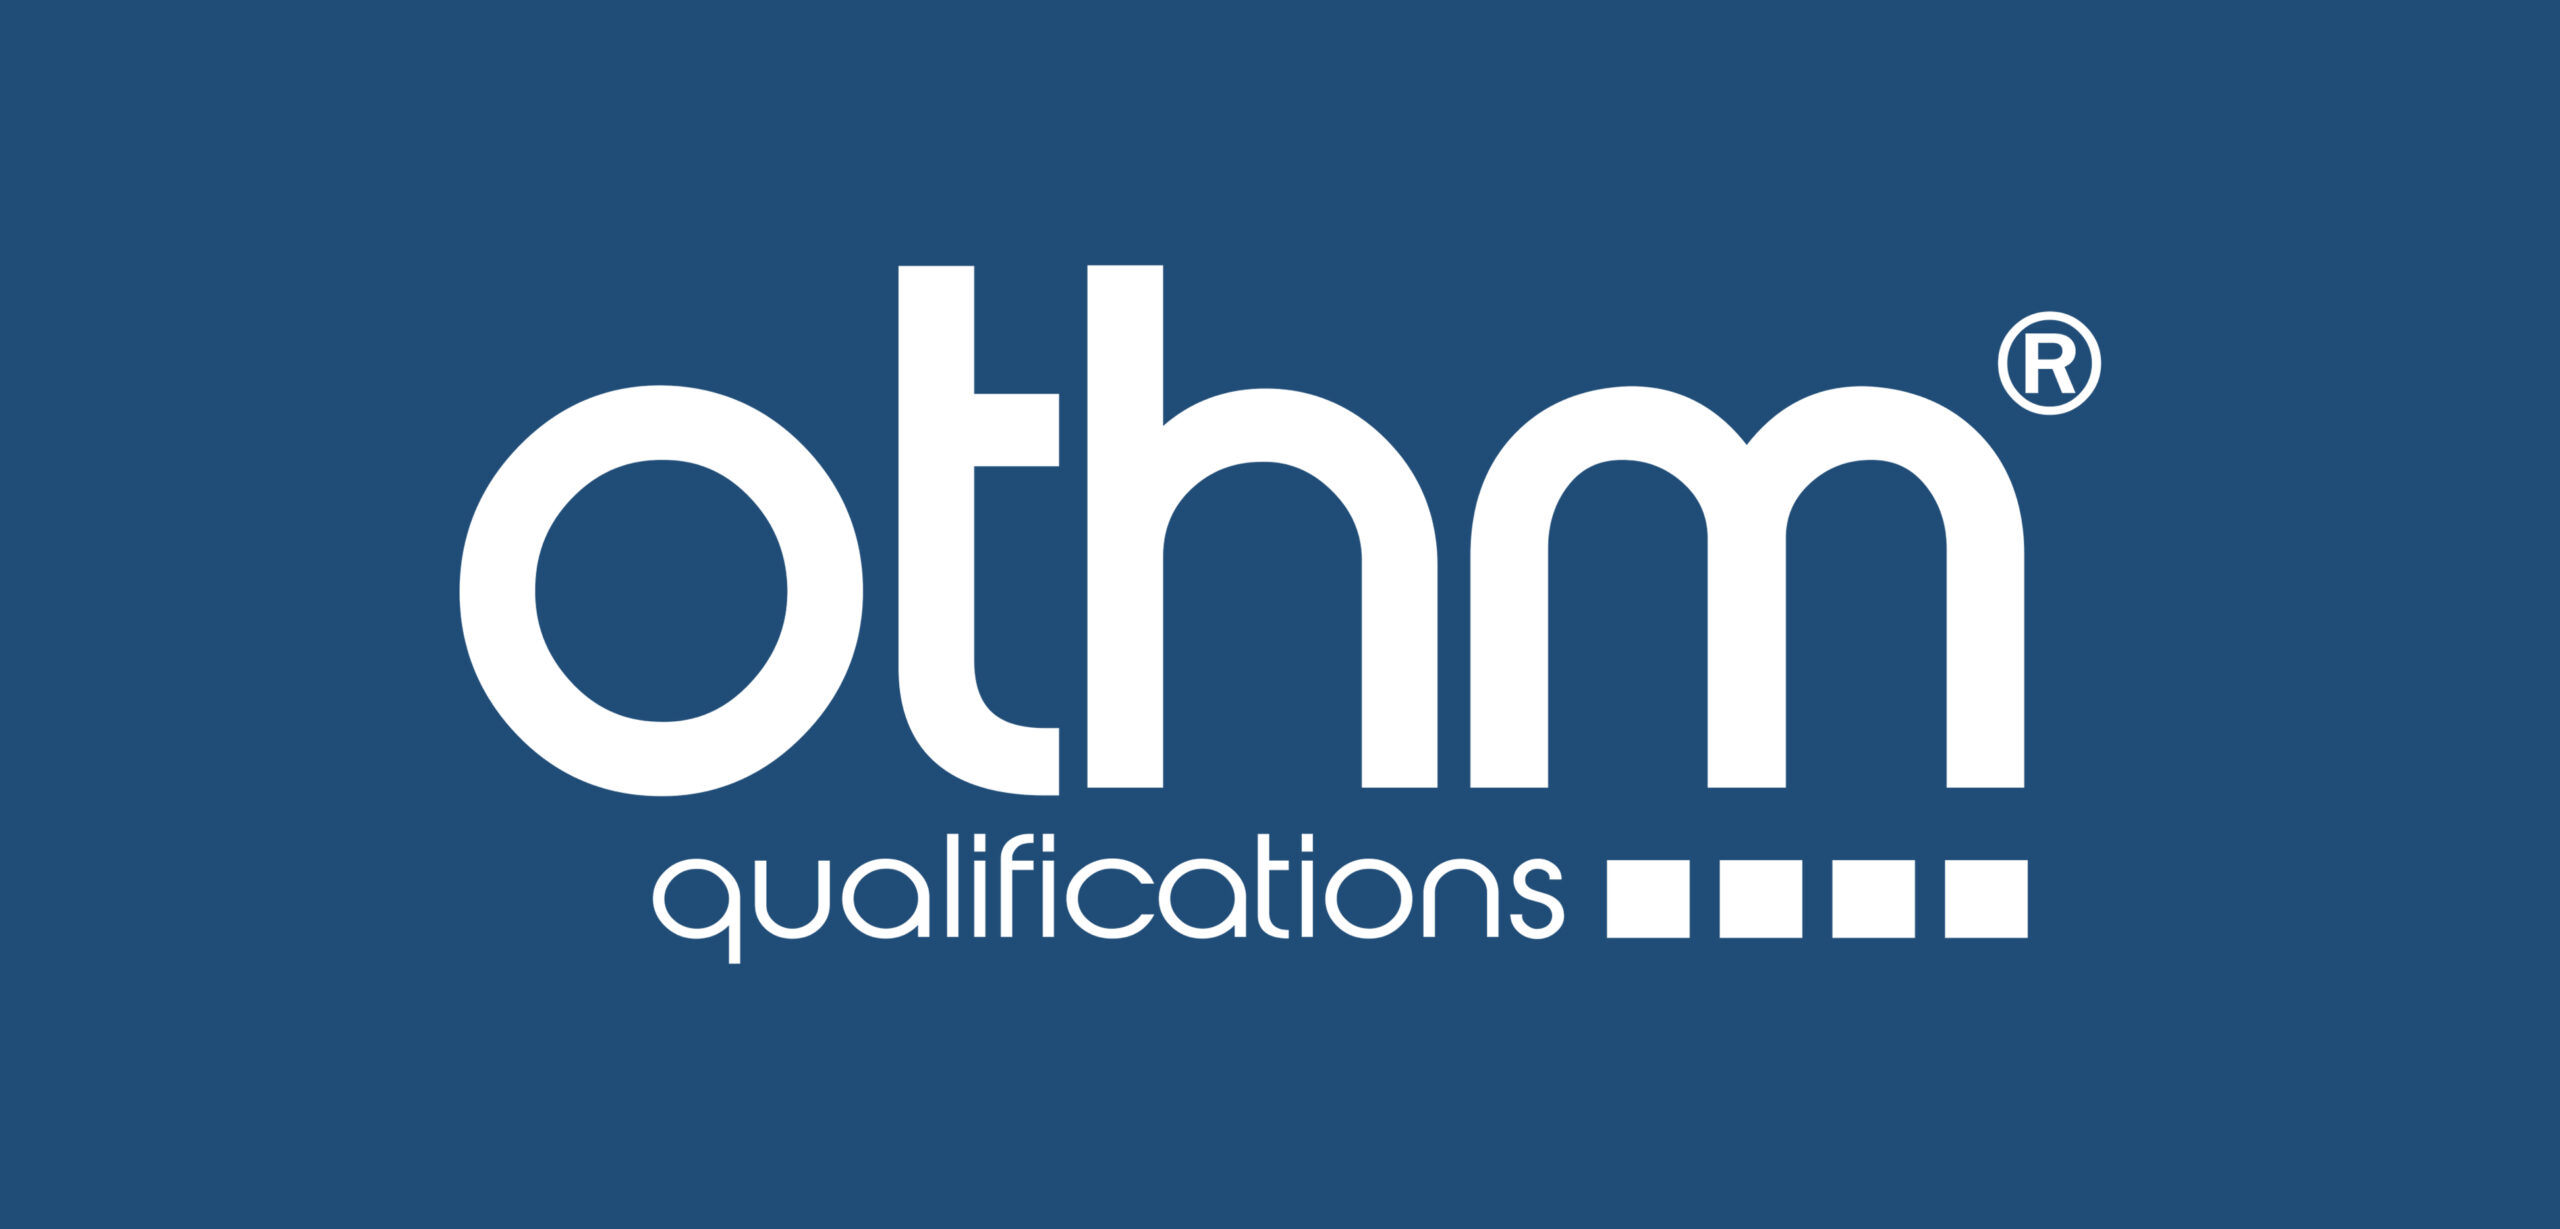 OTHM Level 5 Diploma in Health and Social Care Management